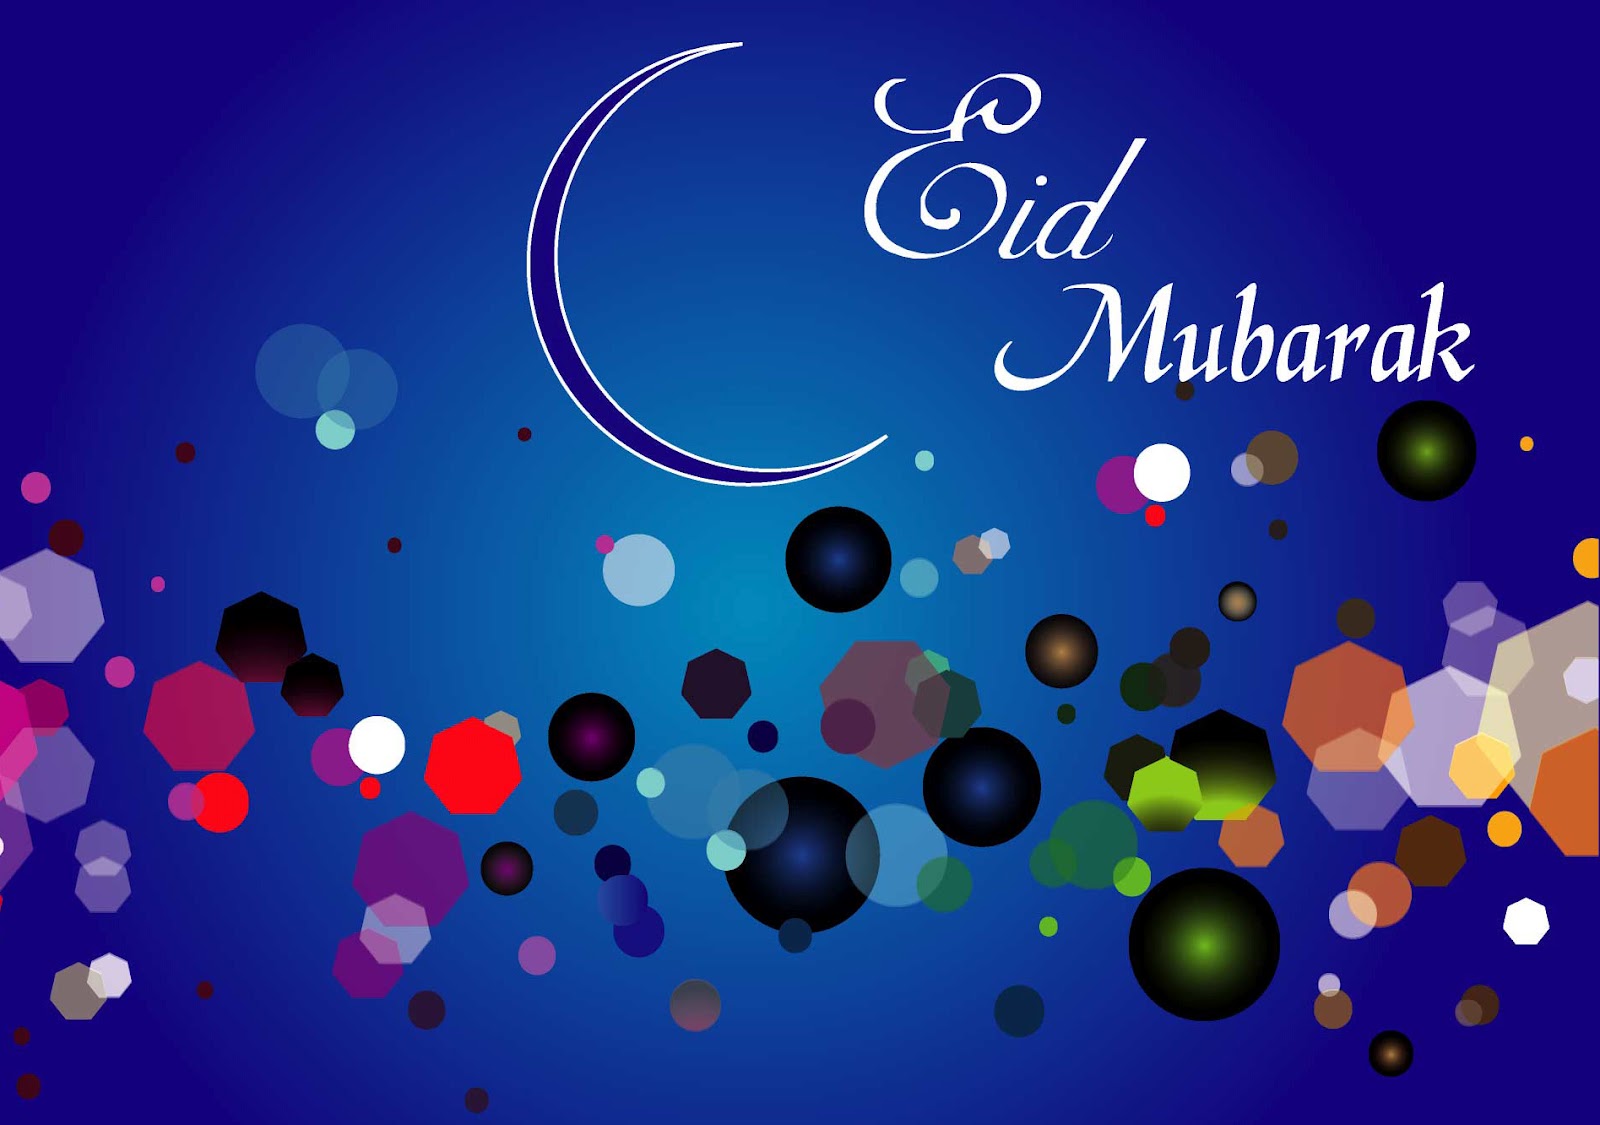 Eid al adha 2017 Wishes, Messages, SMS, Images, Quotes and Greetings